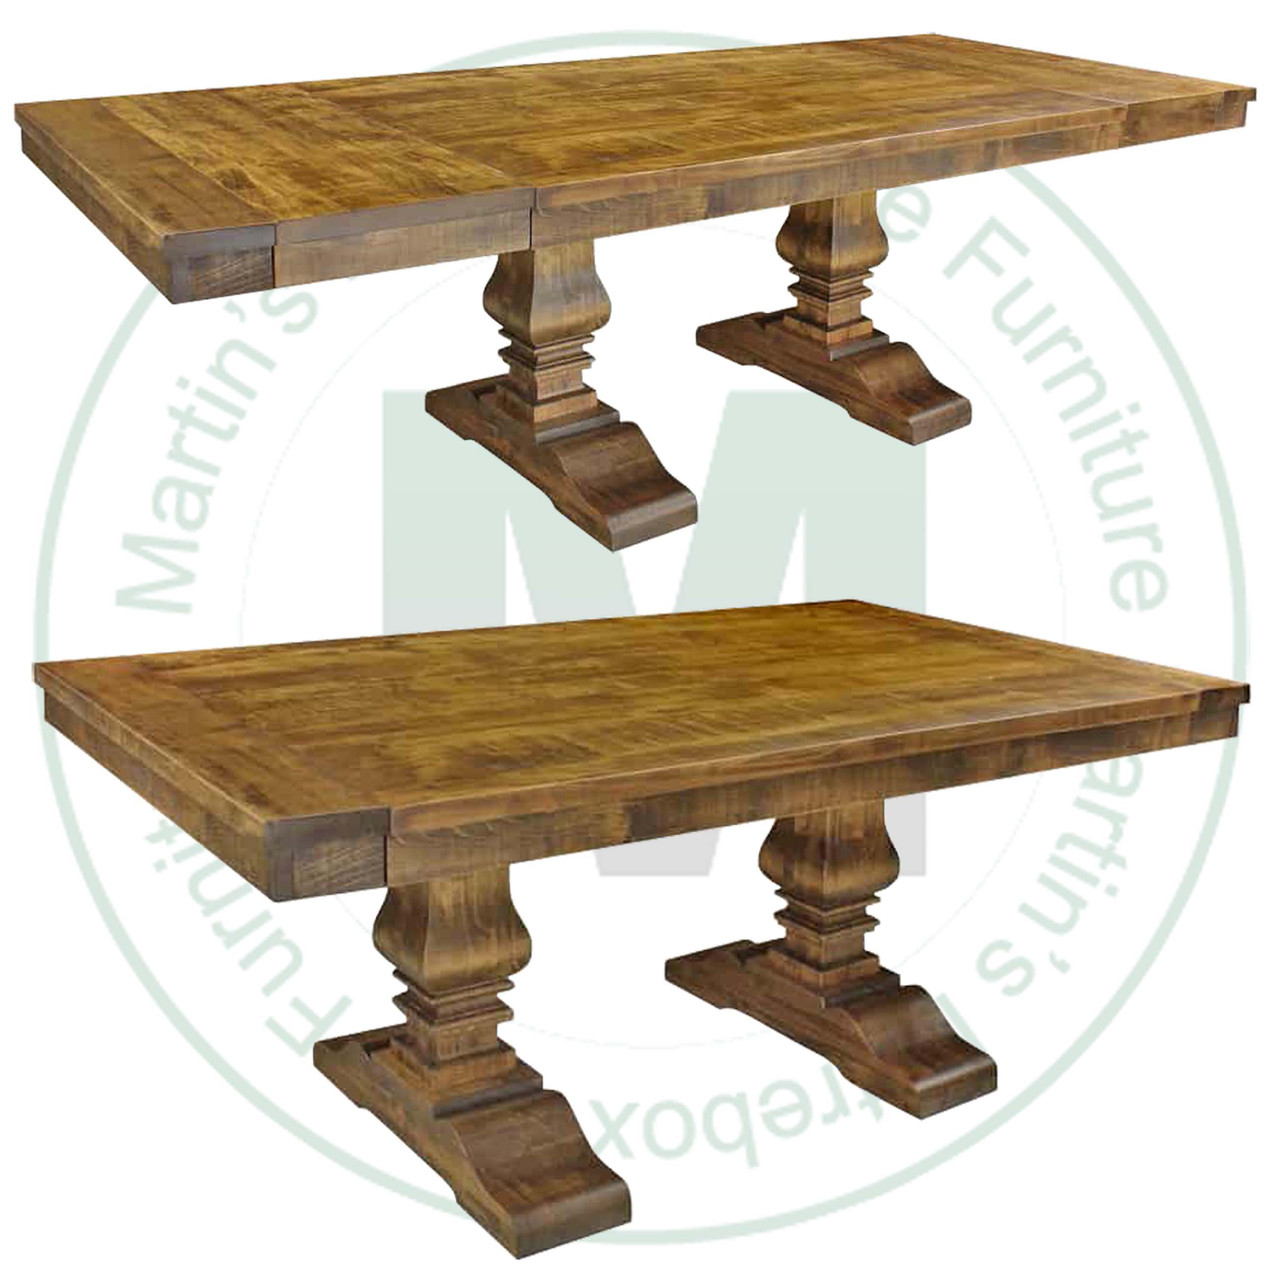 Pine Century Solid Top Double Pedestal Table 36'' Deep x 60'' Wide x 30'' High With 2 - 16'' End Leaves